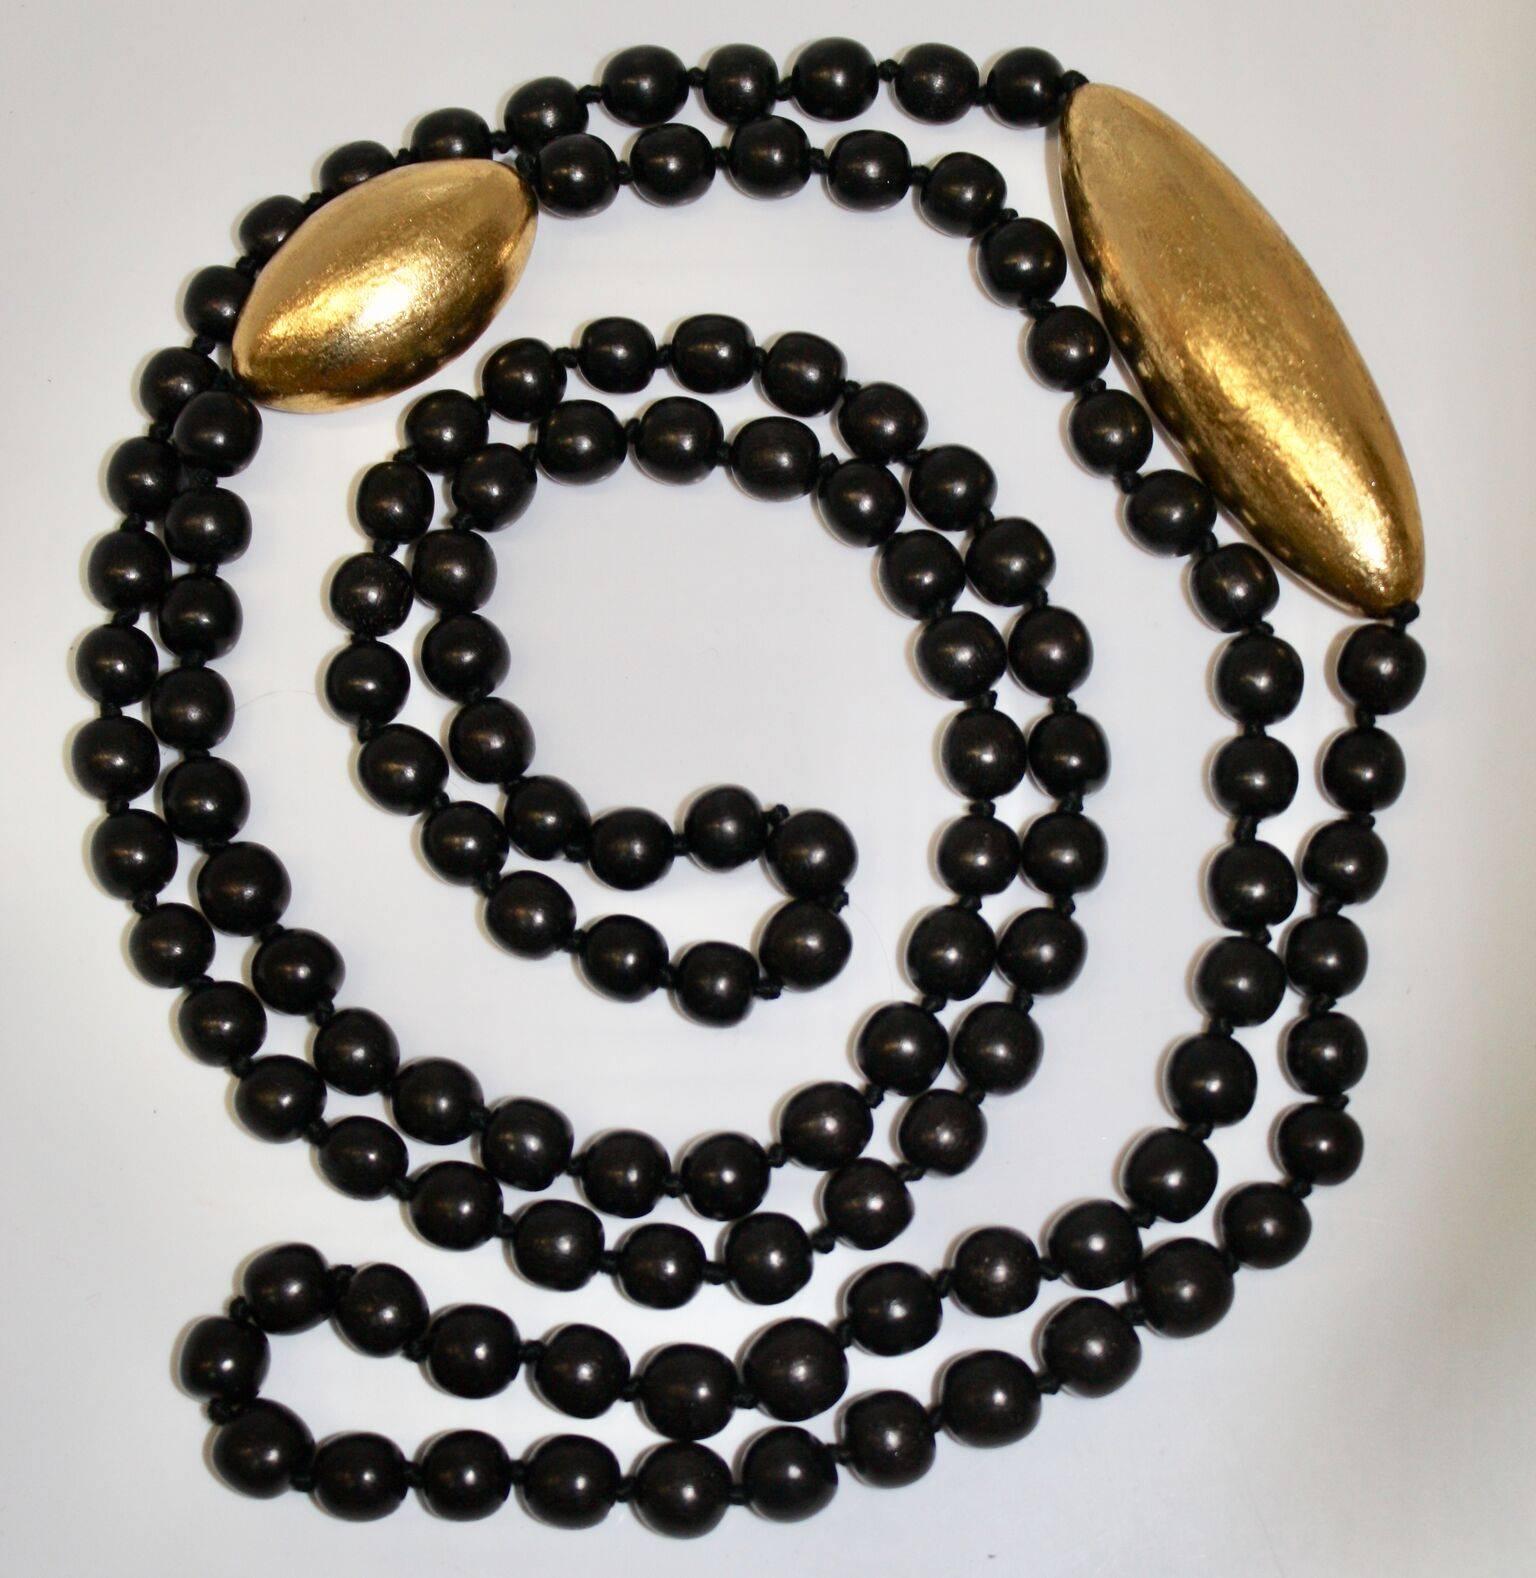 Long wood pearls with two gold leaf elements from Monies. 76